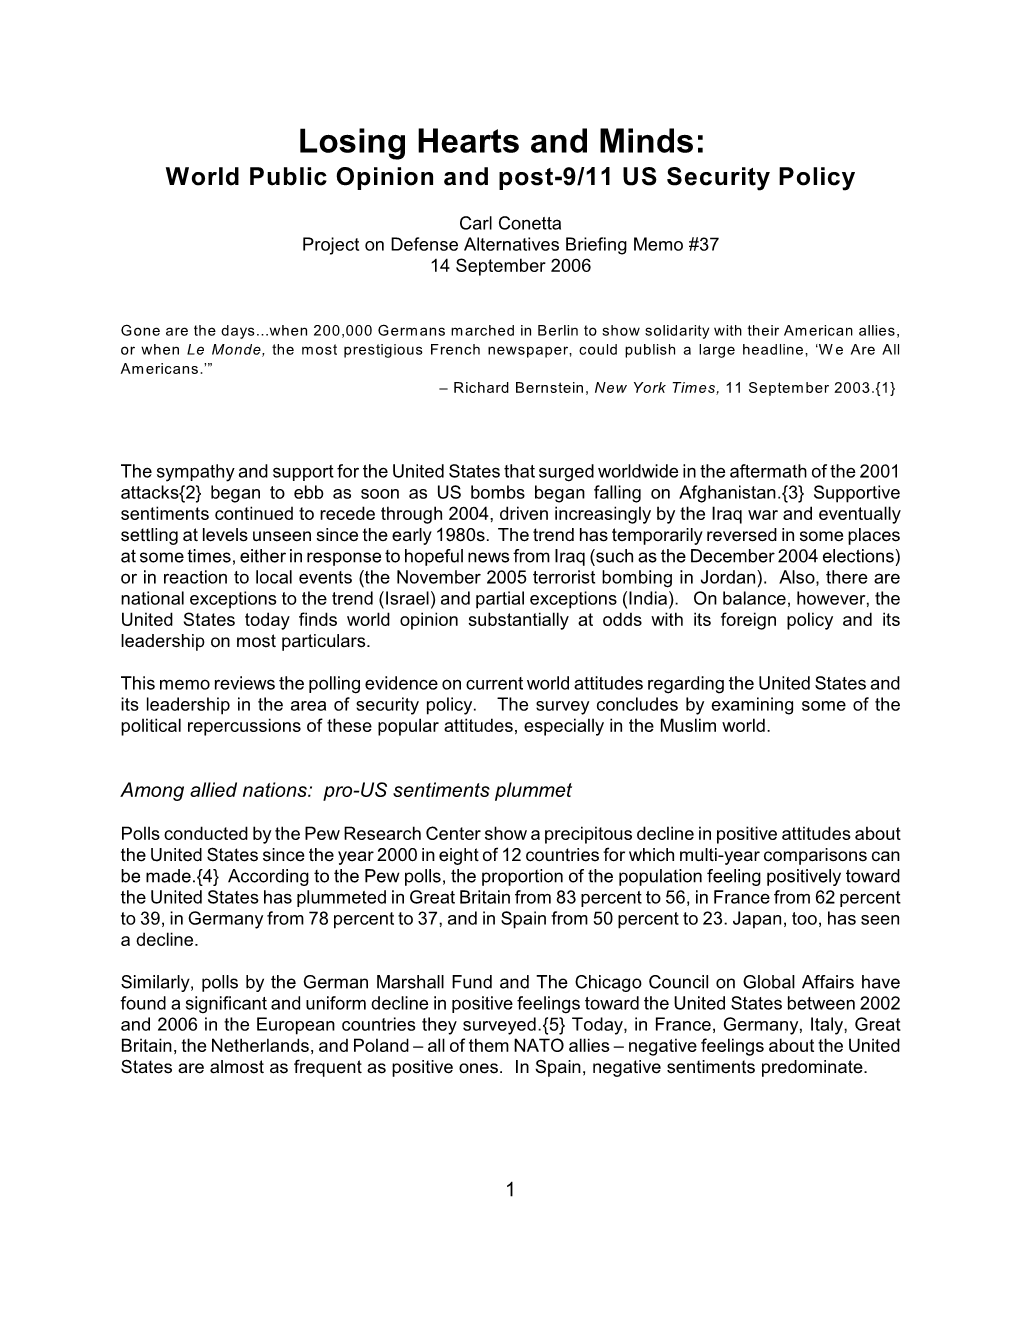 World Public Opinion and Post-9/11 US Security Policy